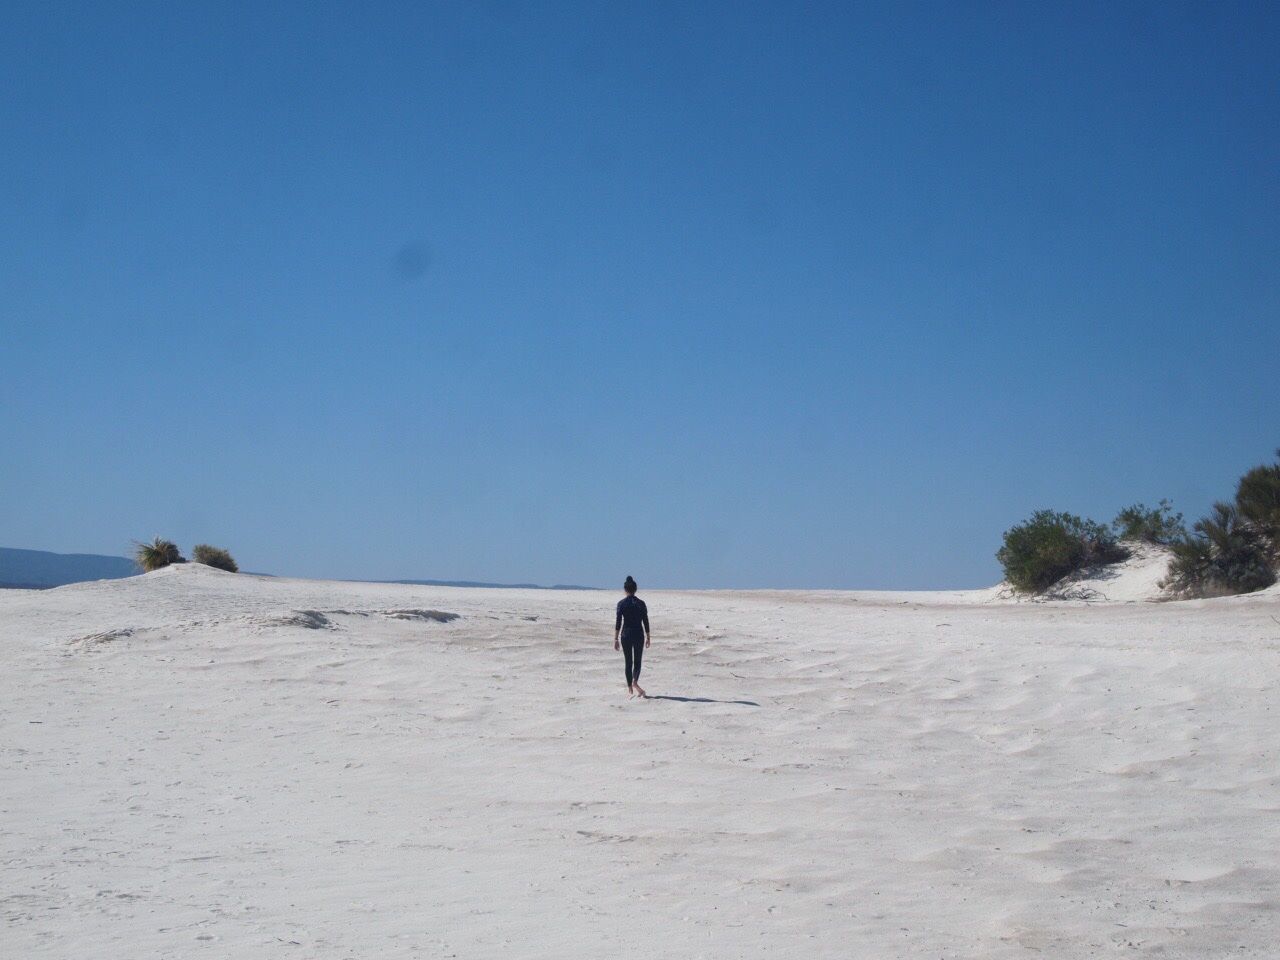 REAR VIEW OF MAN WALKING ON SAND AT BEACH